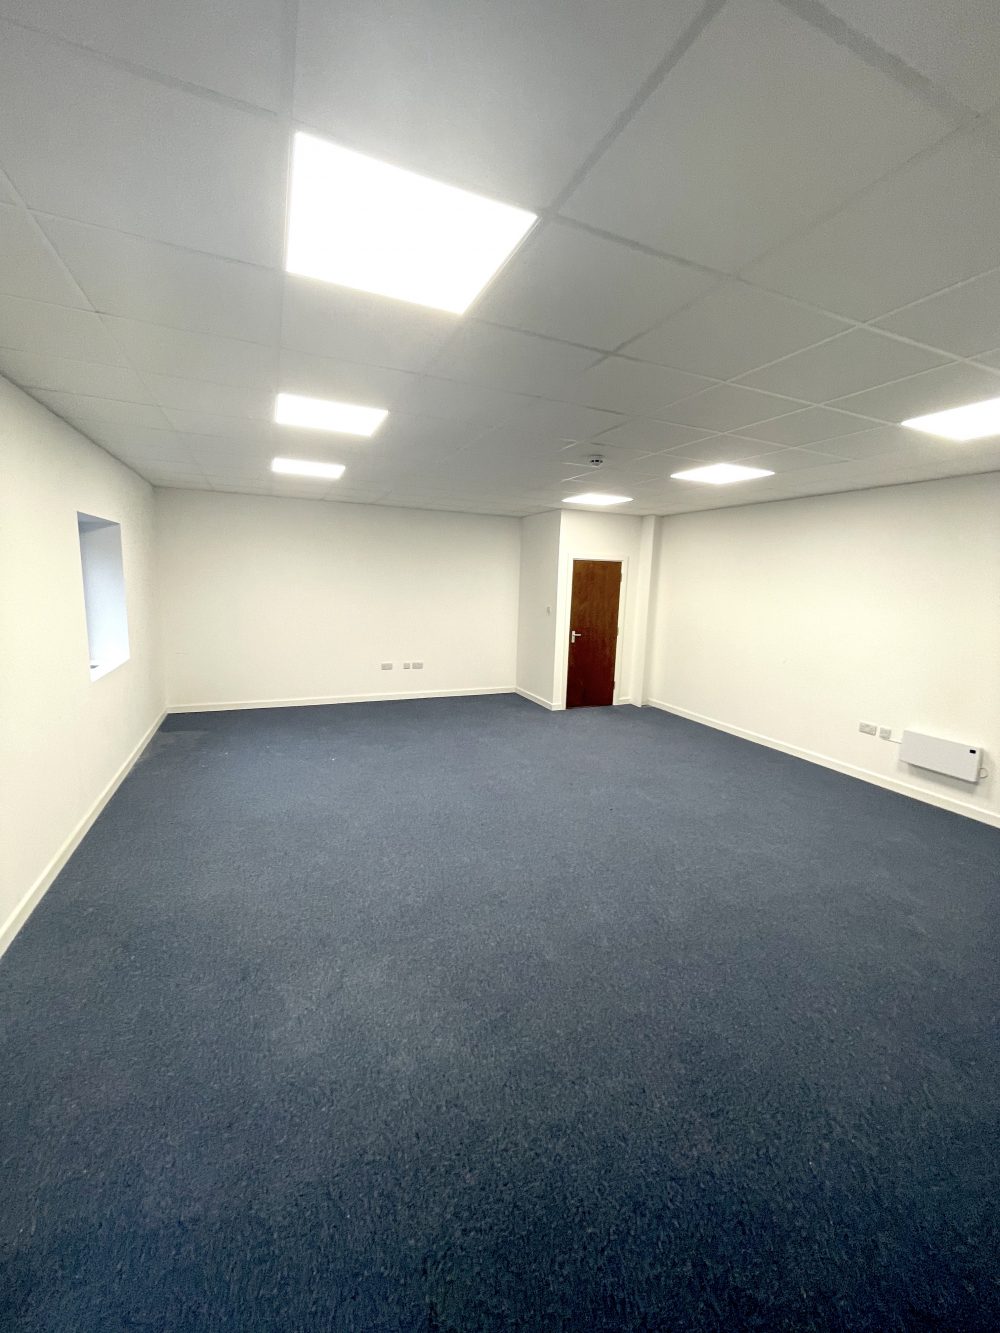 First floor office space : light idustrial creative artist studio to rent in E18 S South Woodford Pic 11